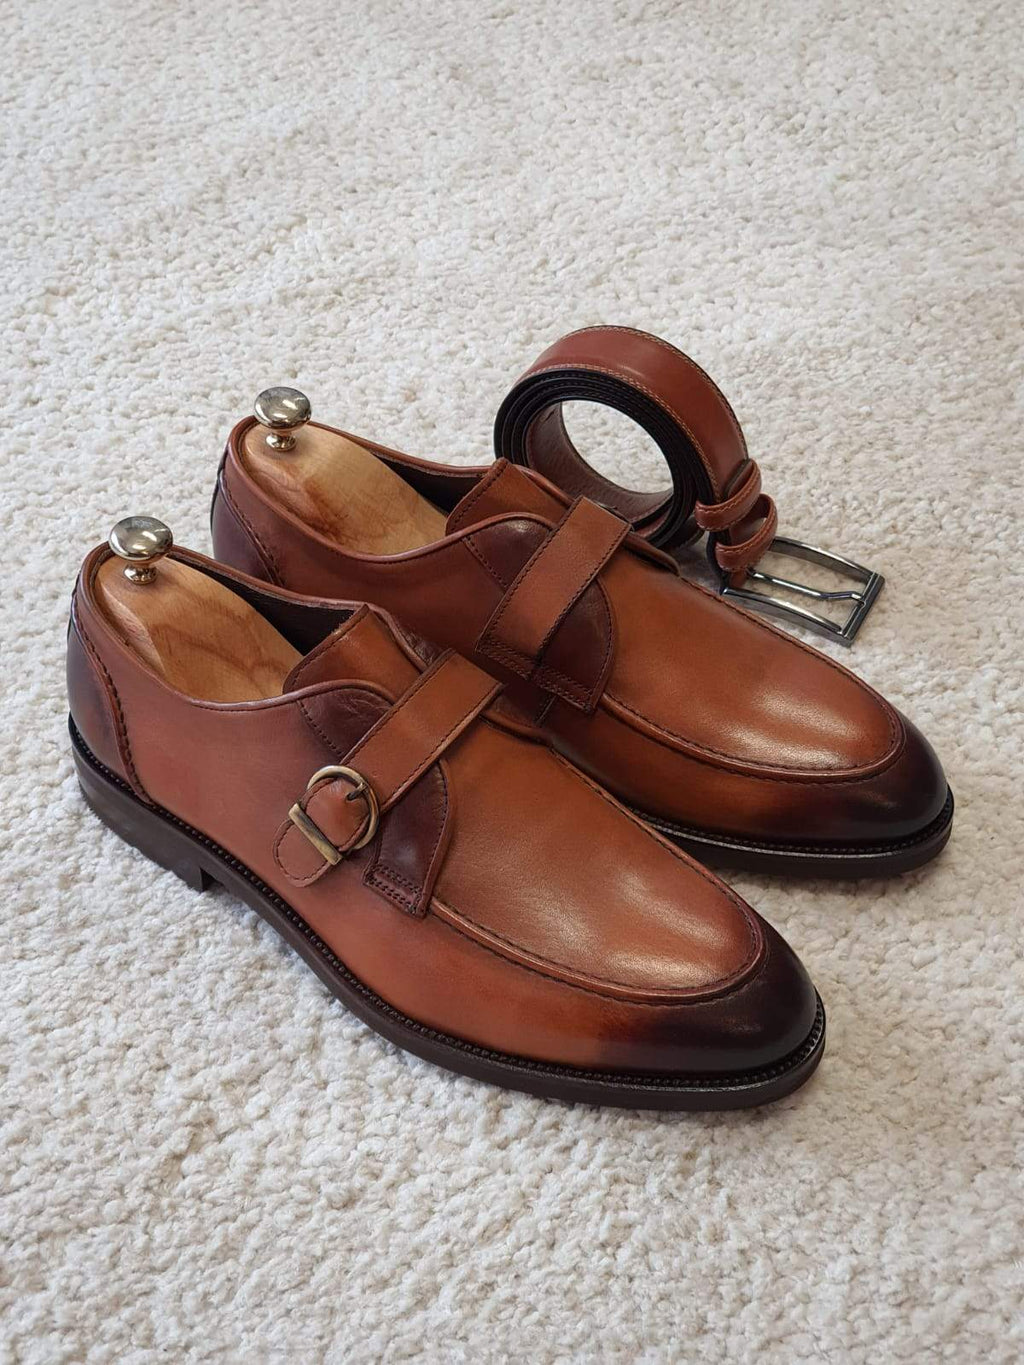 Vicenza Tan Buckle Loafers-baagr.myshopify.com-shoes2-brabion